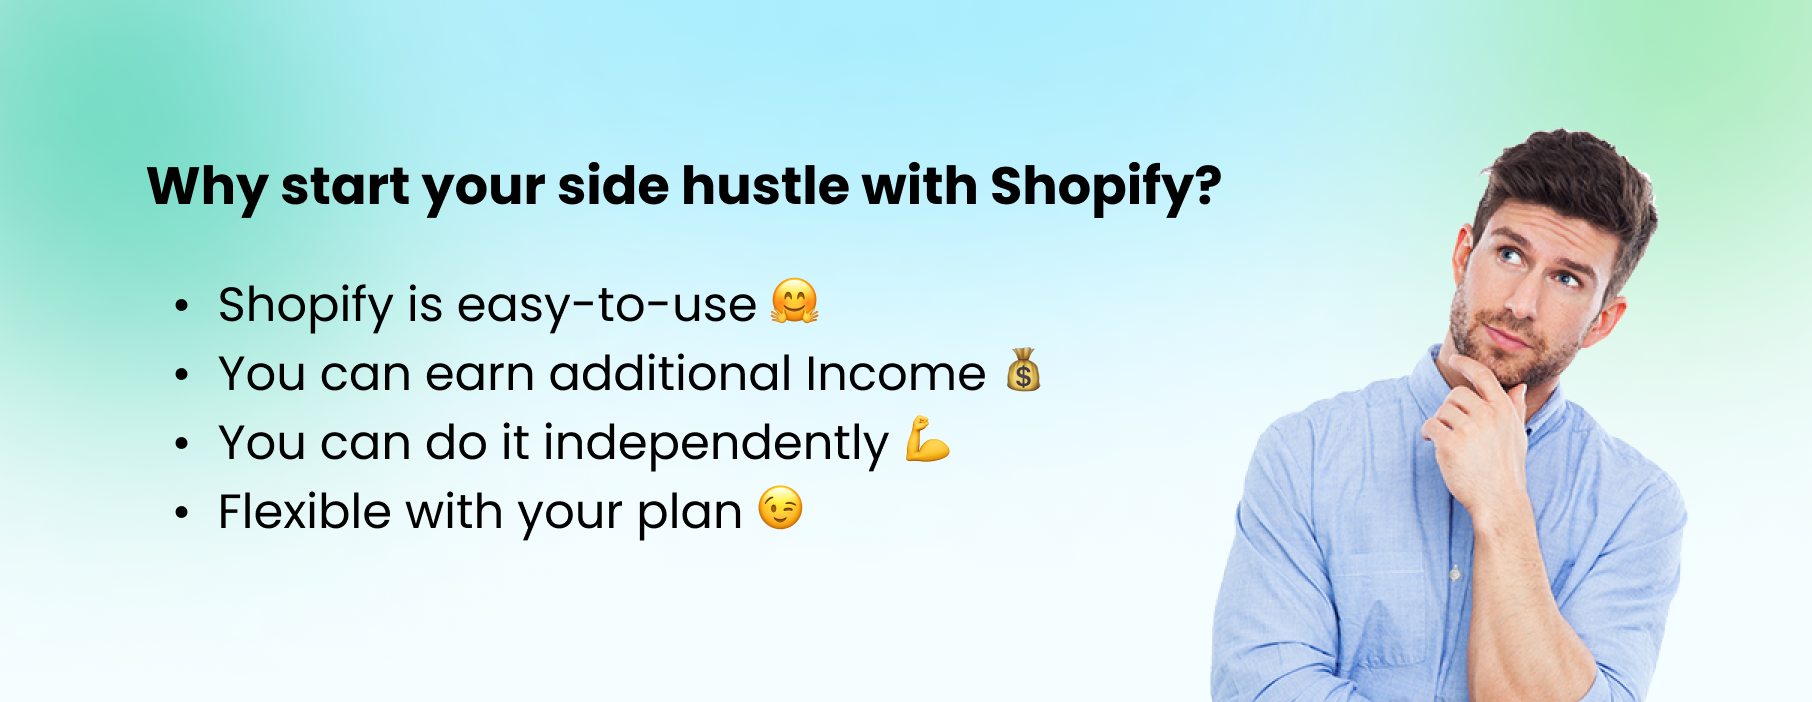 Top reasons to start a side hustle business with Shopify